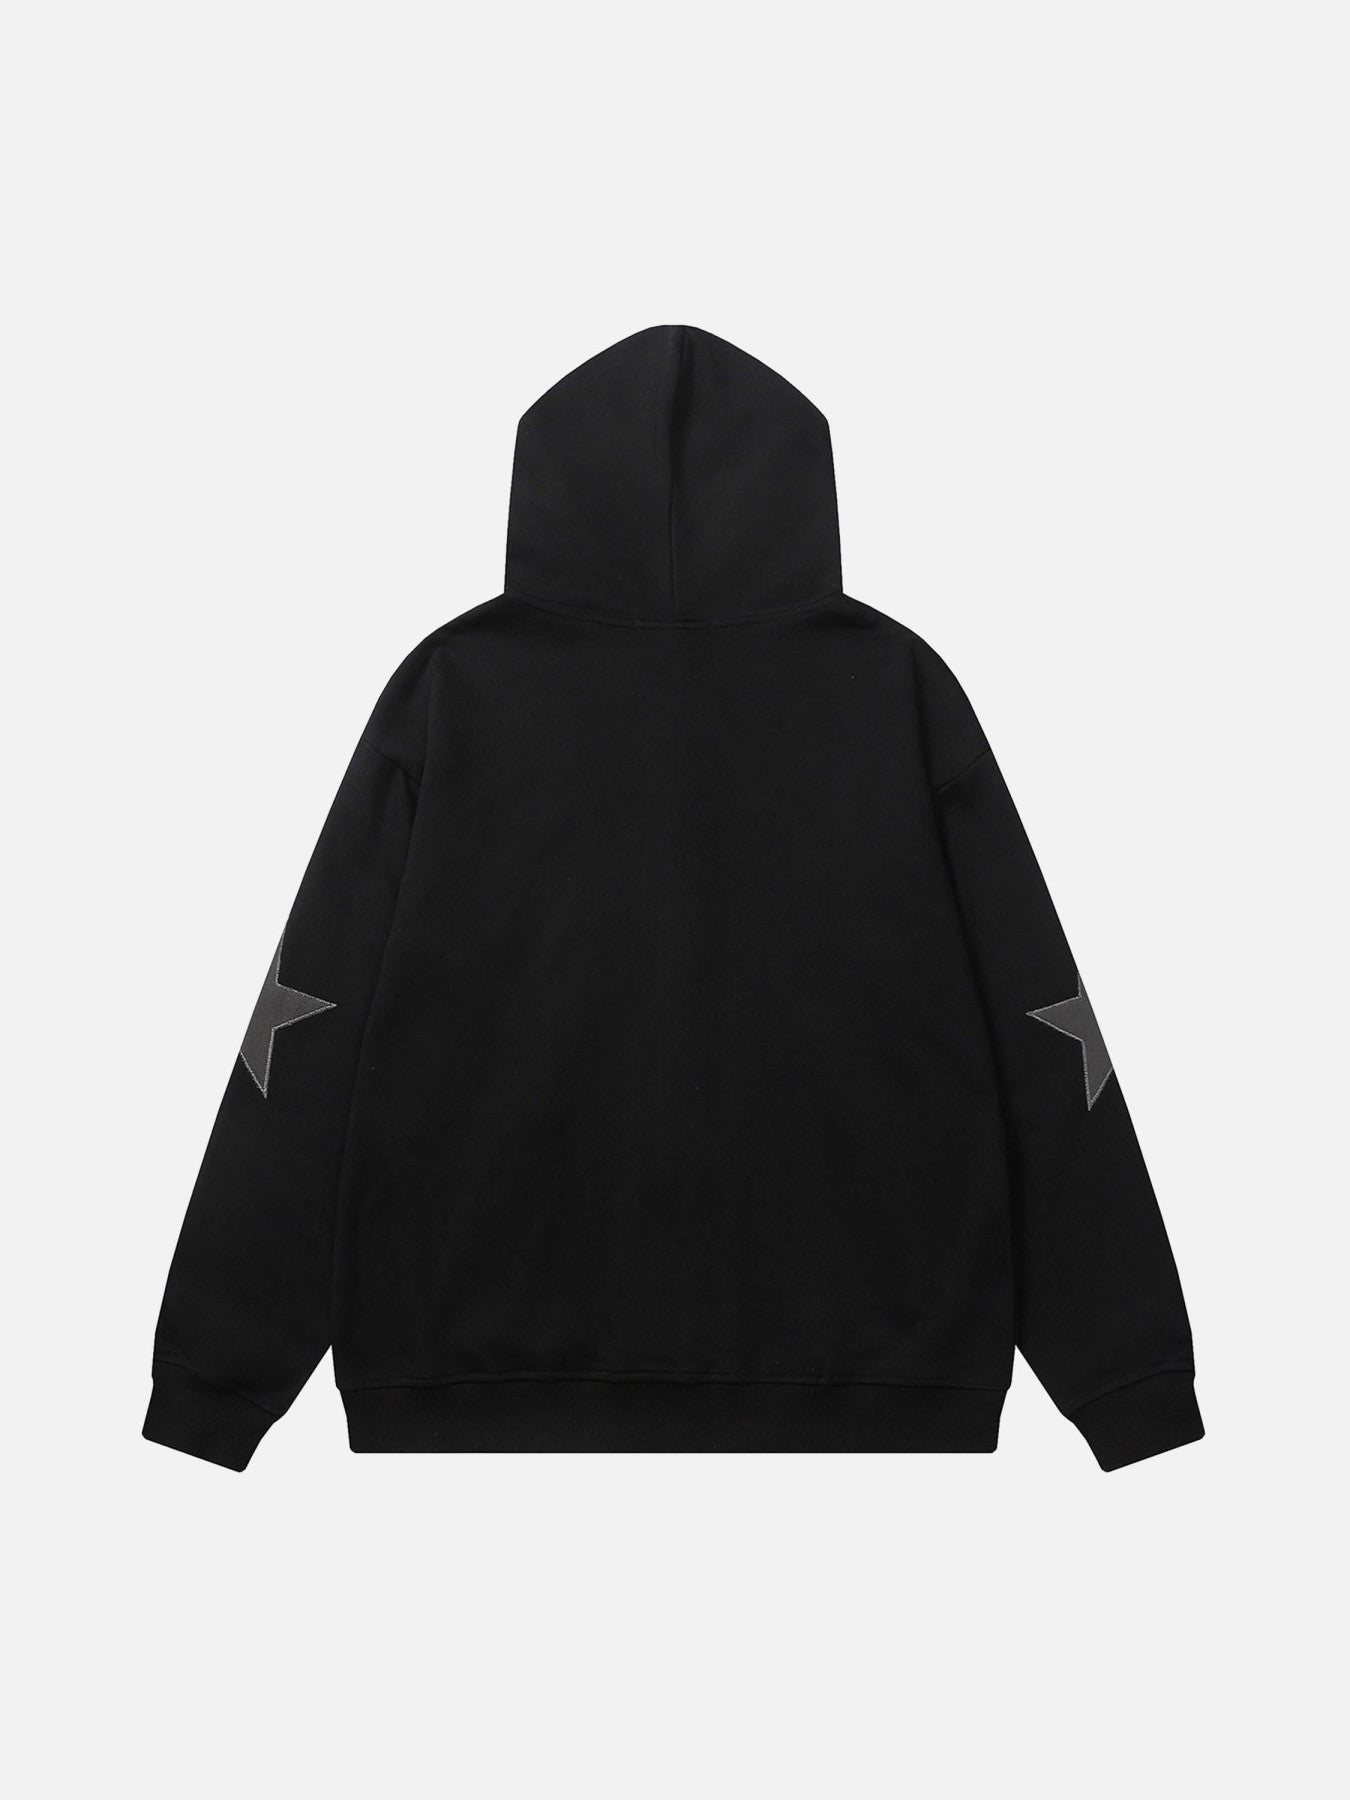 Thesupermade Five-pointed Zipper Hoodie